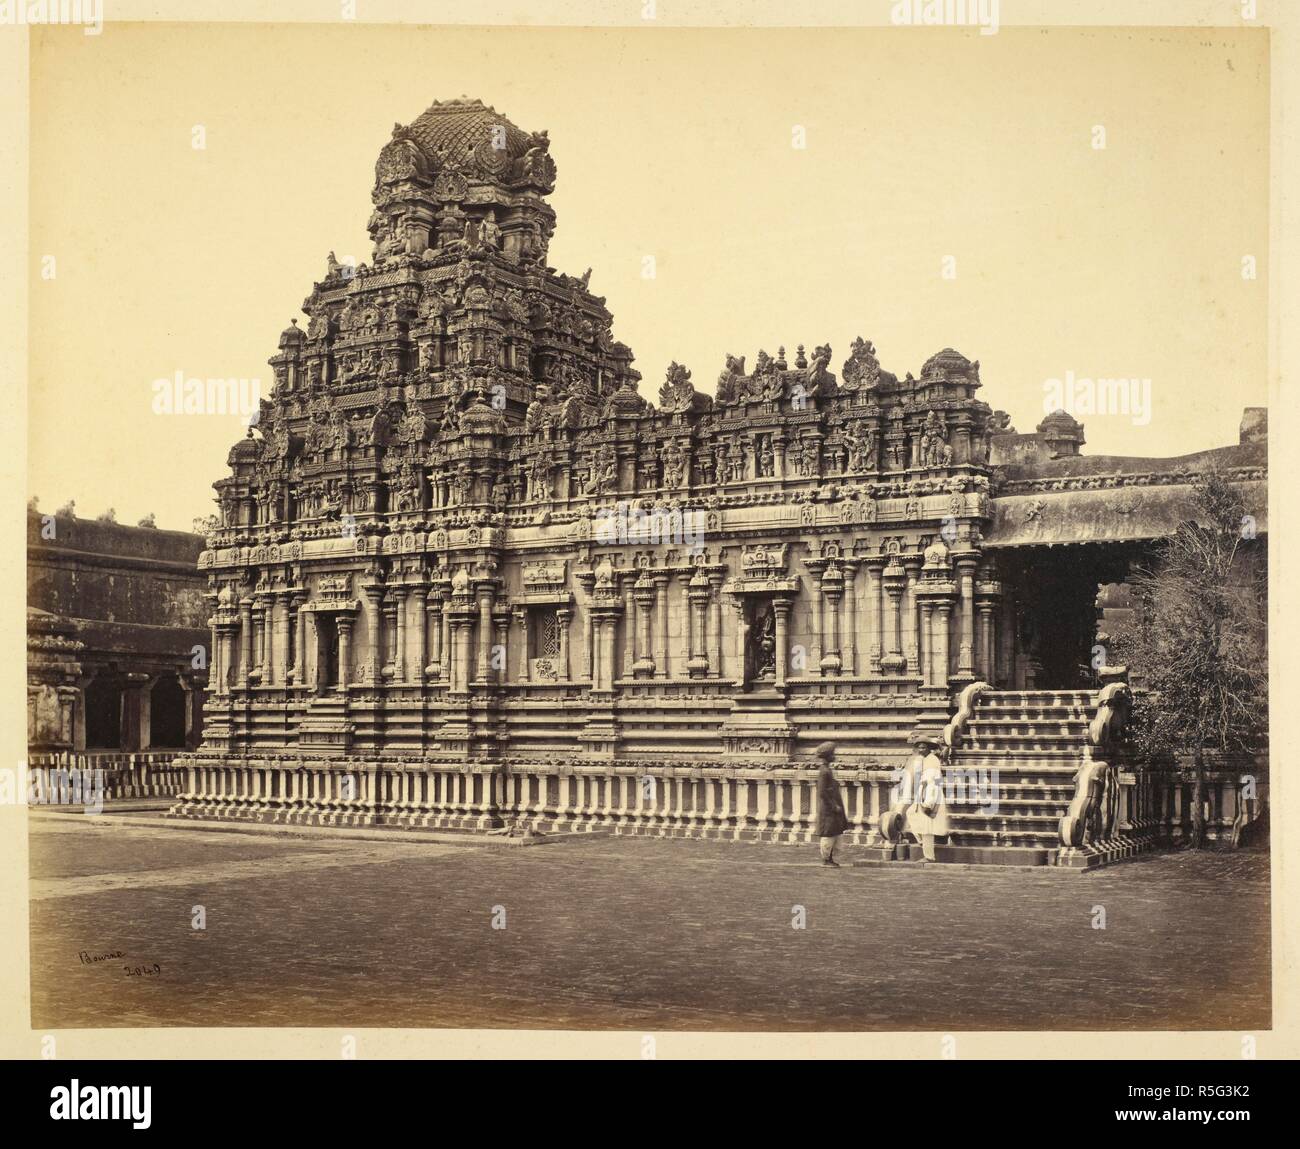 A view of the Subrahmanya Temple near the Pagoda, Tanjore. Album of photographs mostly by Samuel Bourne. 1869. Photograph. Source: Photo 11/(11). Stock Photo